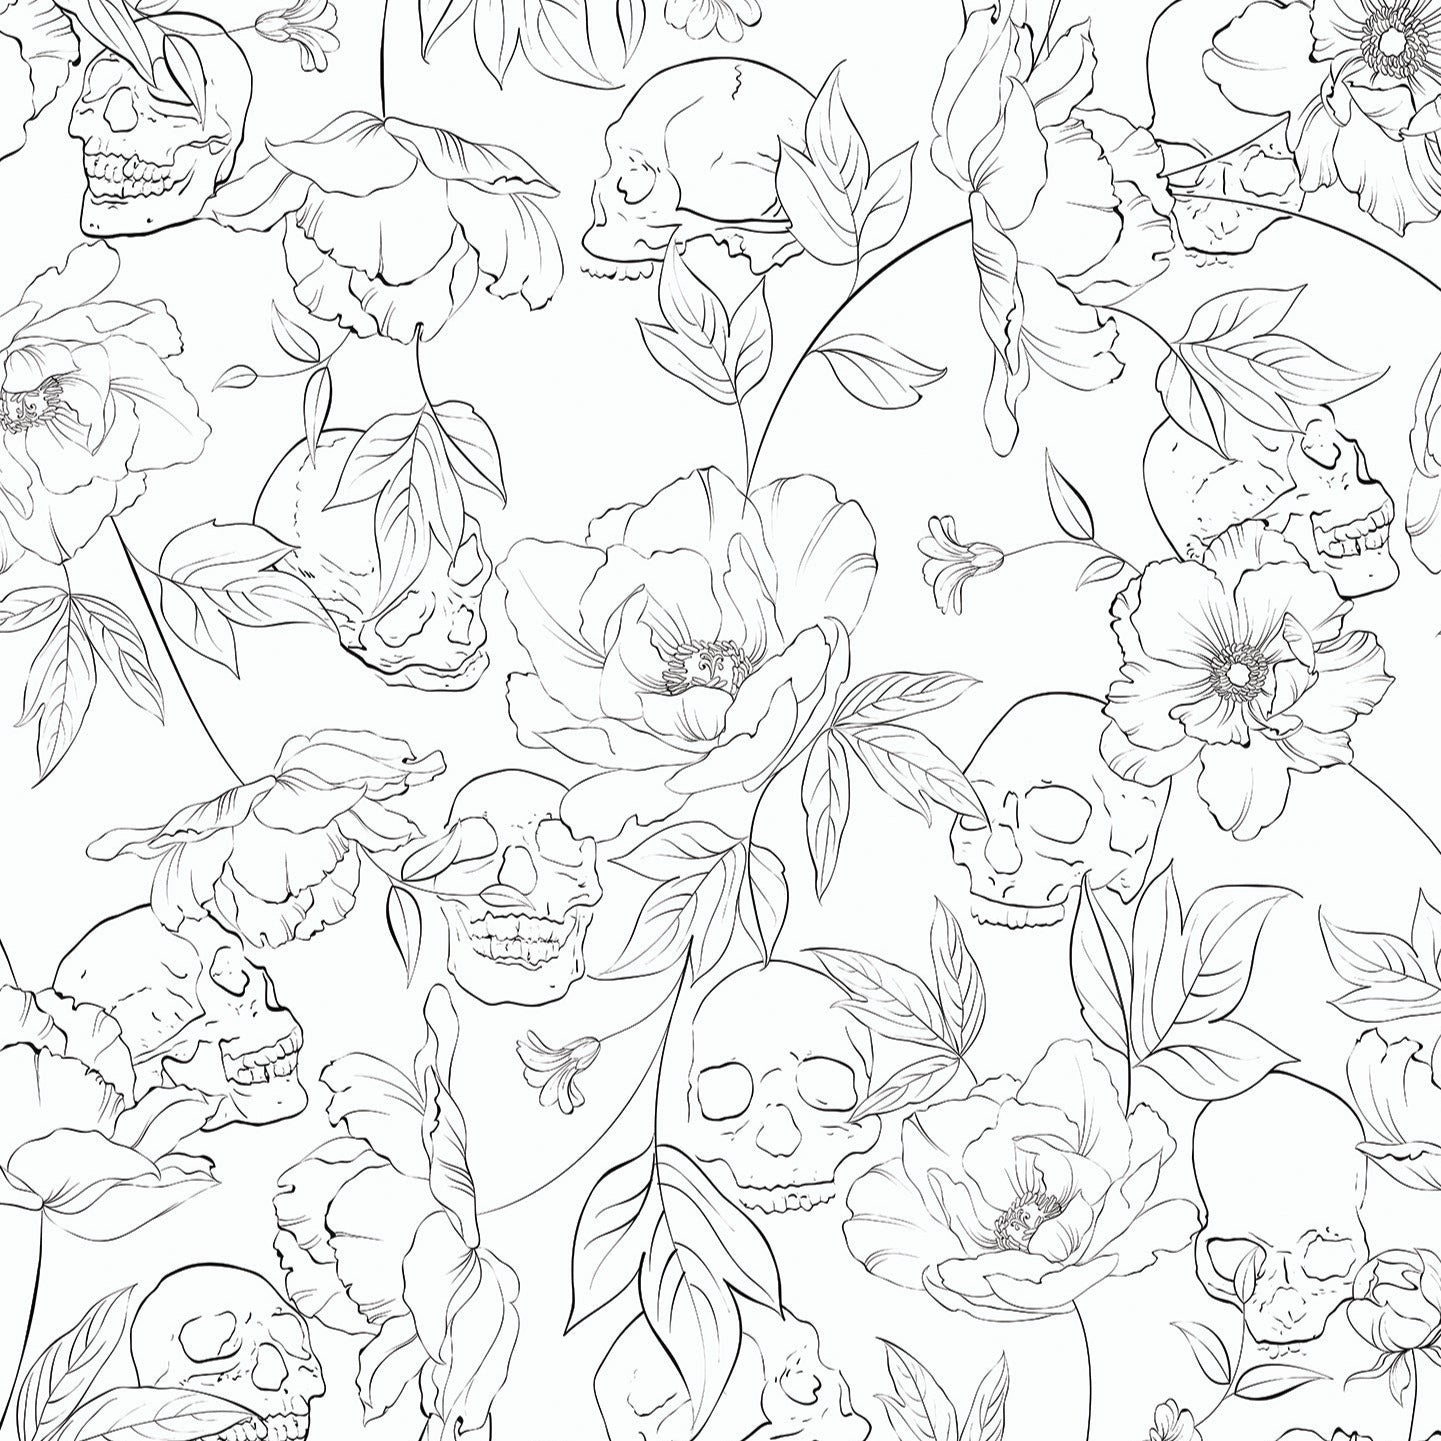 Close-up of the Dainty Skull Floral Wallpaper showing detailed line drawings of flowers and skulls, providing a unique and artistic decoration for a bold interior design statement